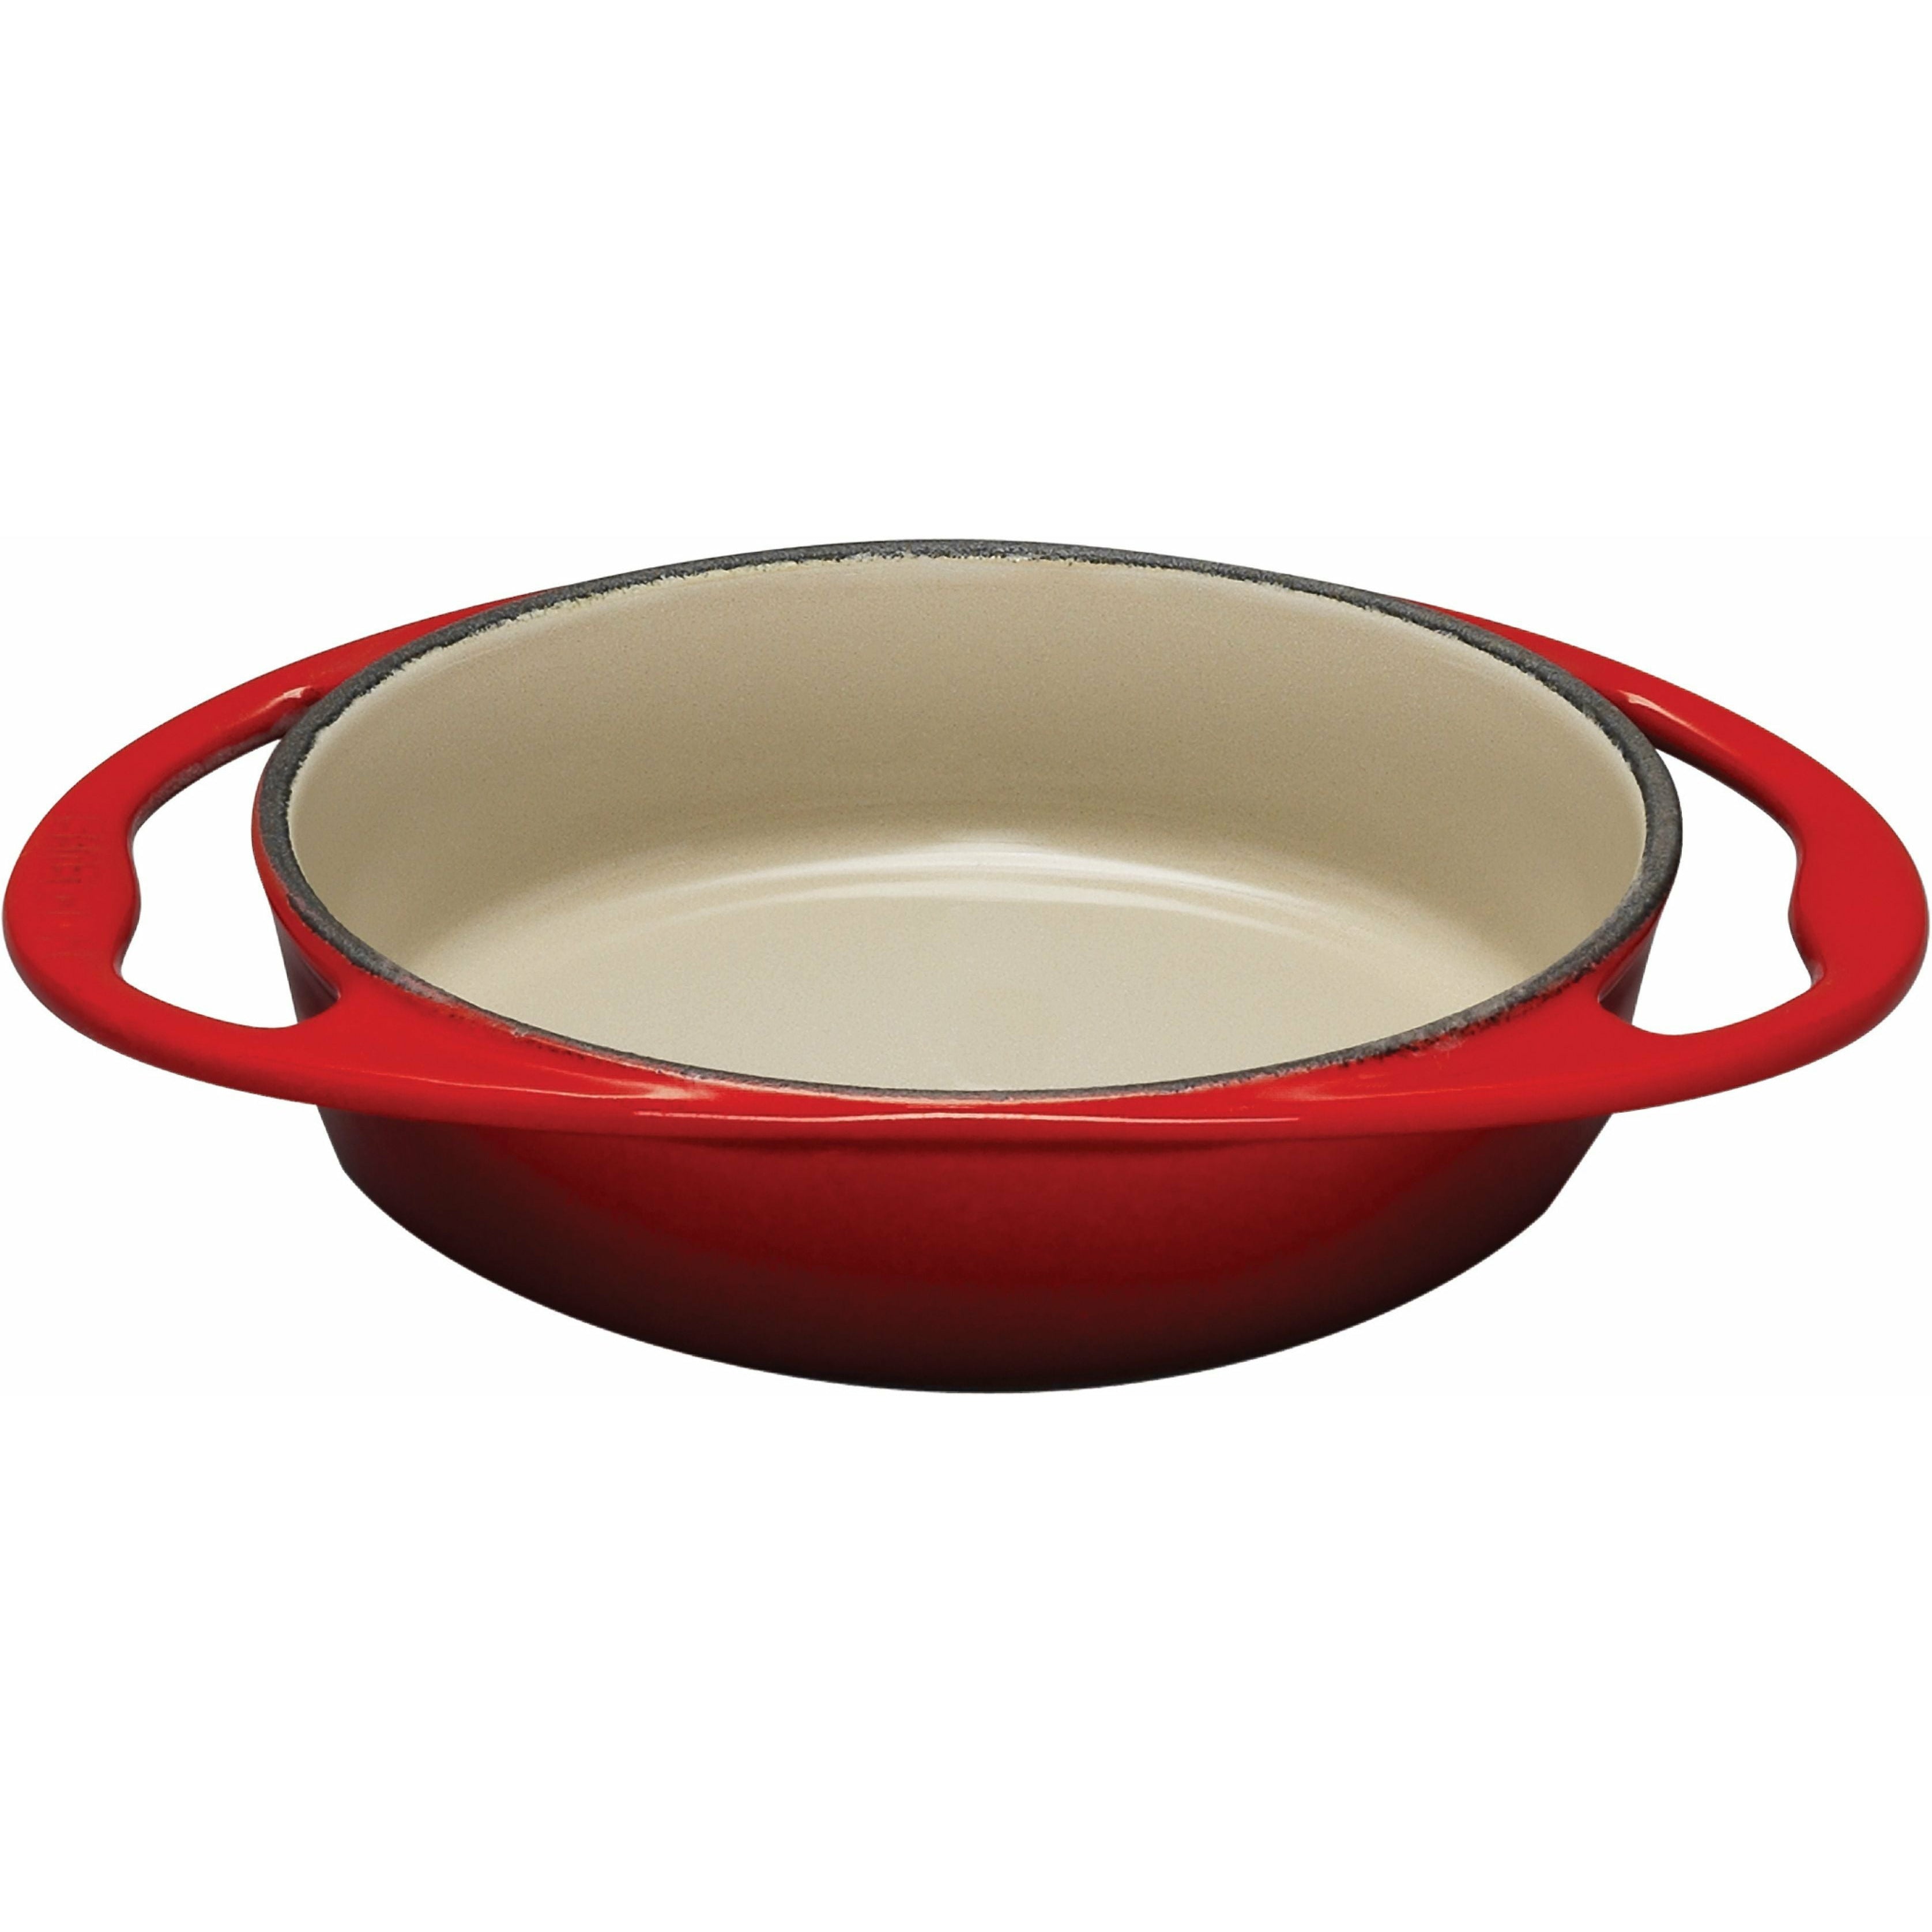 Le Creuset Tradition Tatin Baking Pan 28 Cm, Cherry Red